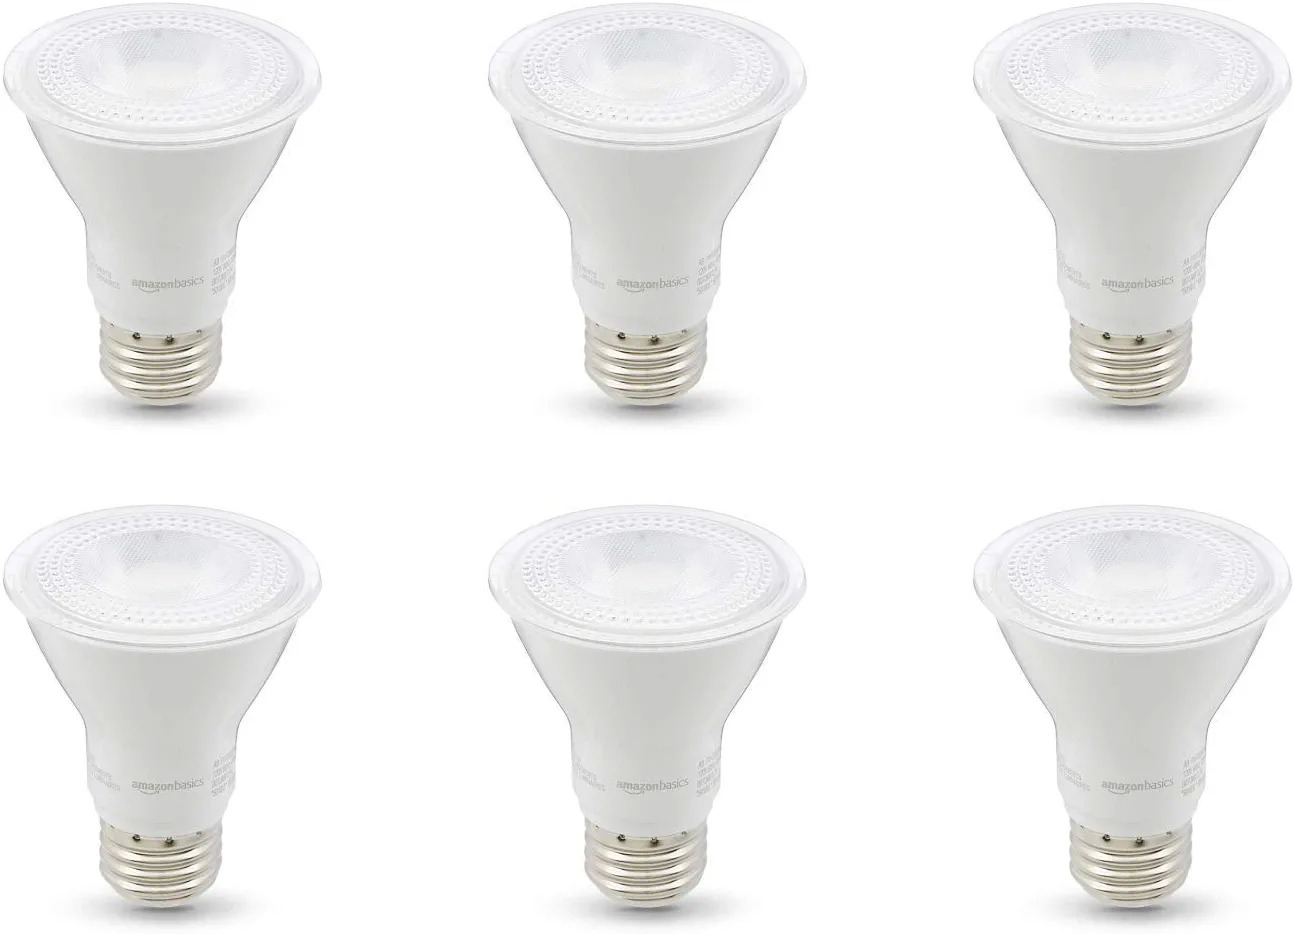 6-Pack Amazon Basics 50W Equivalent PAR20 Dimmable Daylight LED Light Bulbs $5.85 + Free Shipping w/ Prime or $25+